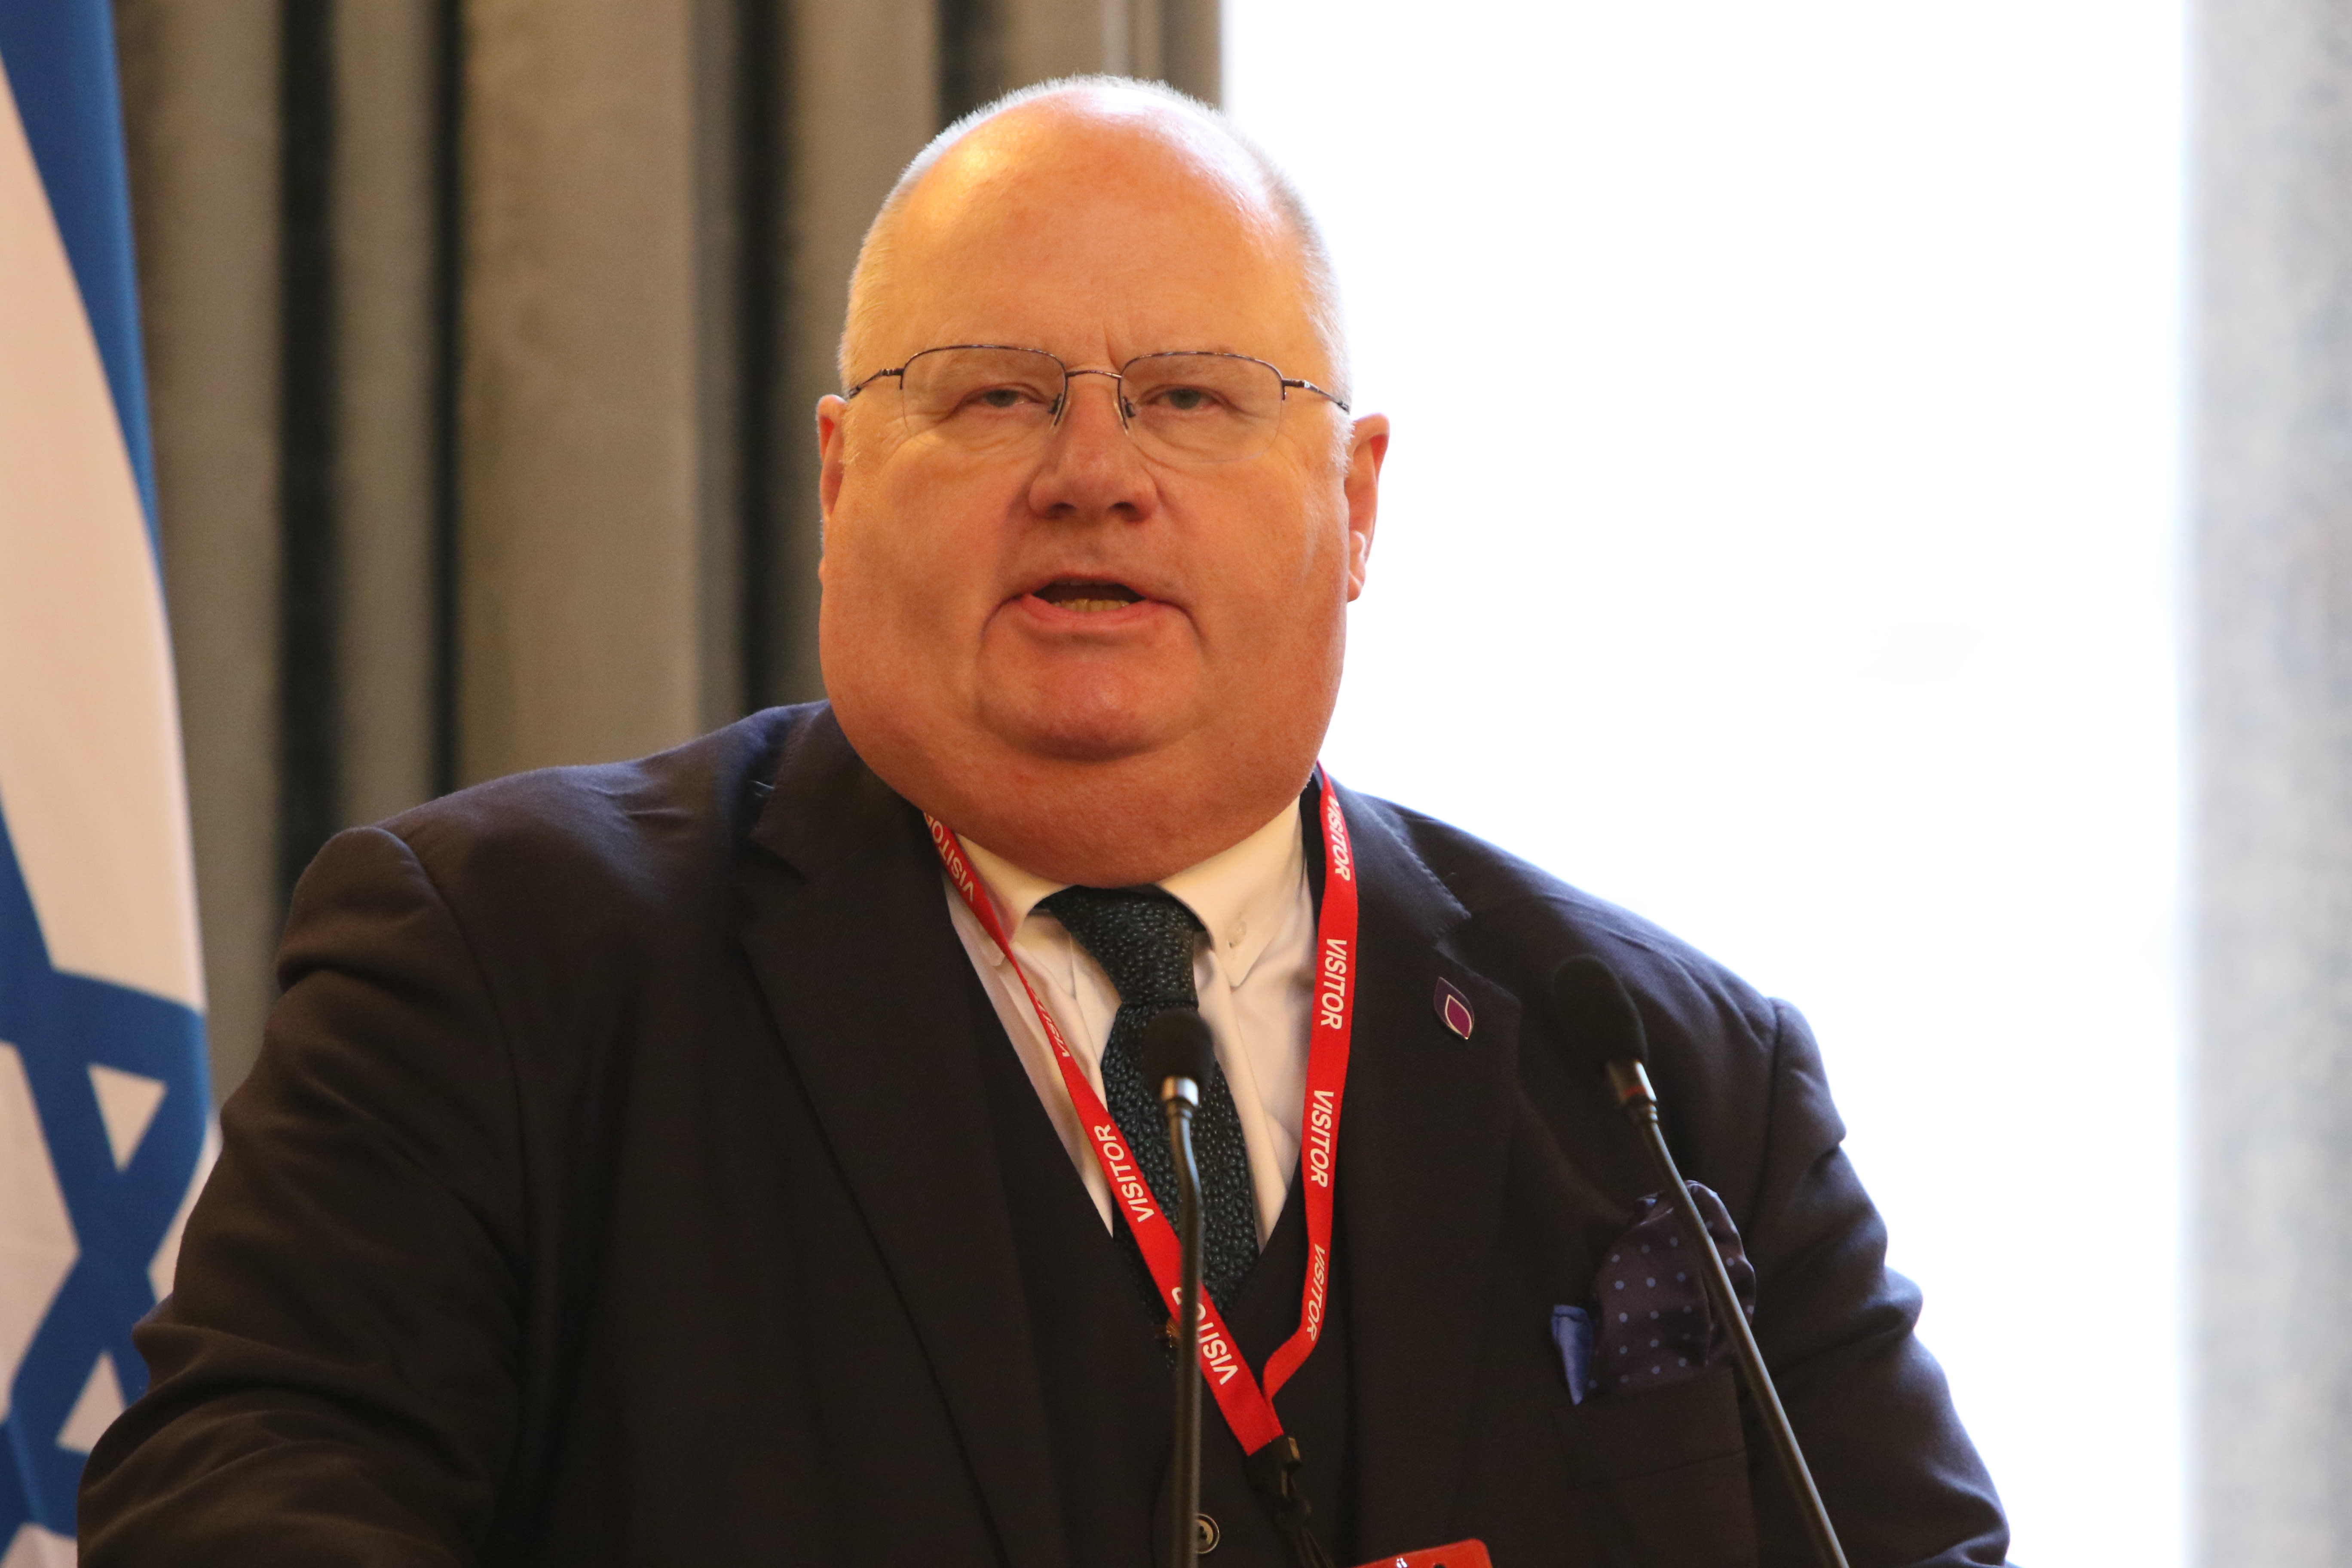 Sir Eric Pickles, Special Envoy for Post-Holocaust issues speaking at the Commemoration of Holocaust Memorial Day event, January 23, 2018 (FOREIGN AND COMMONWEALTH OFFICE / WIKIMEDIA COMMONS).